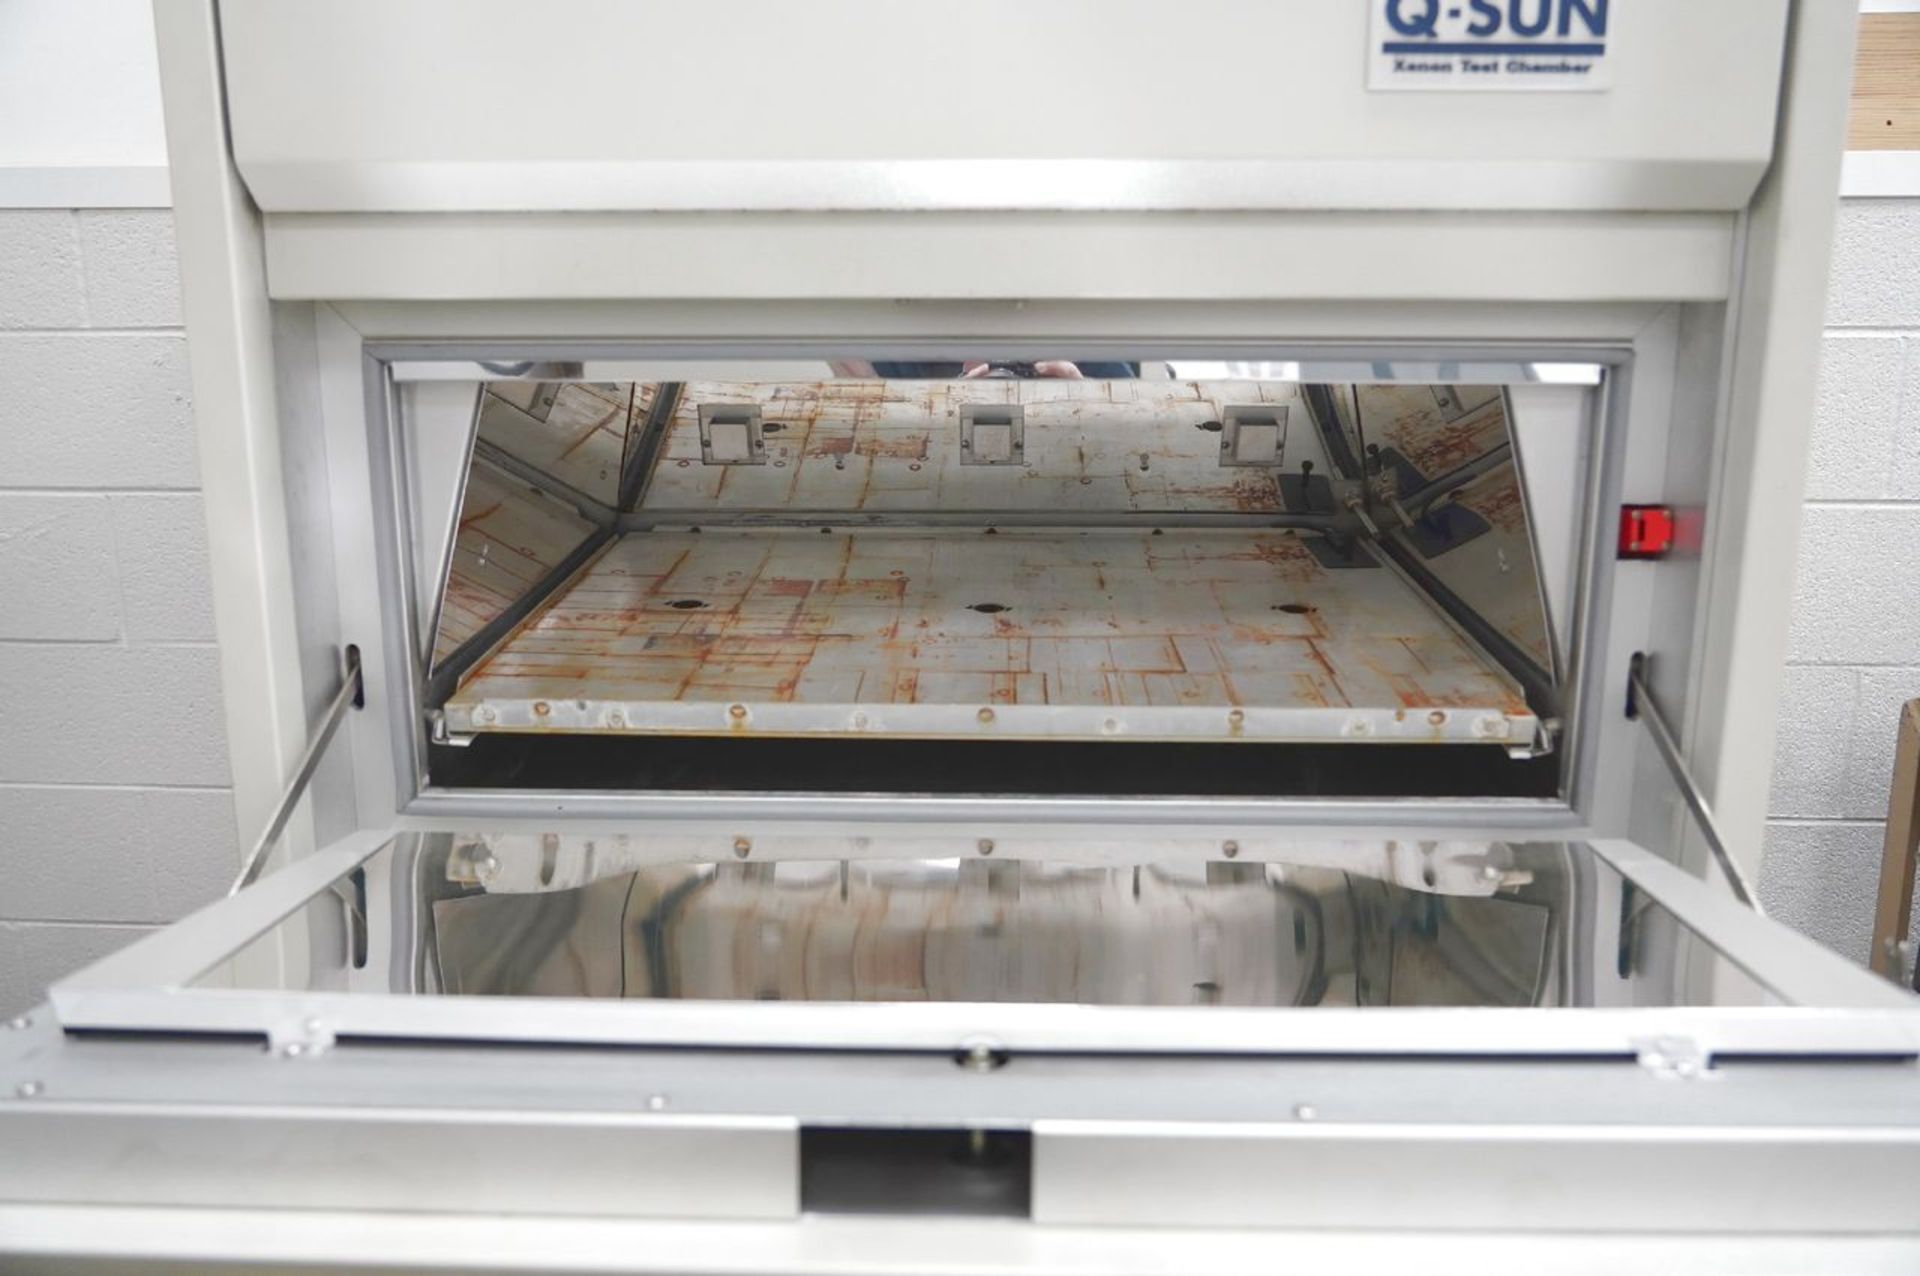 Q-Panel Lab Products Q-Sun/3000 Xenon Test Chamber, S/N 98-1018-01-X3X, 208 Volts, 36 Amps, 50/60 Hz - Image 3 of 6